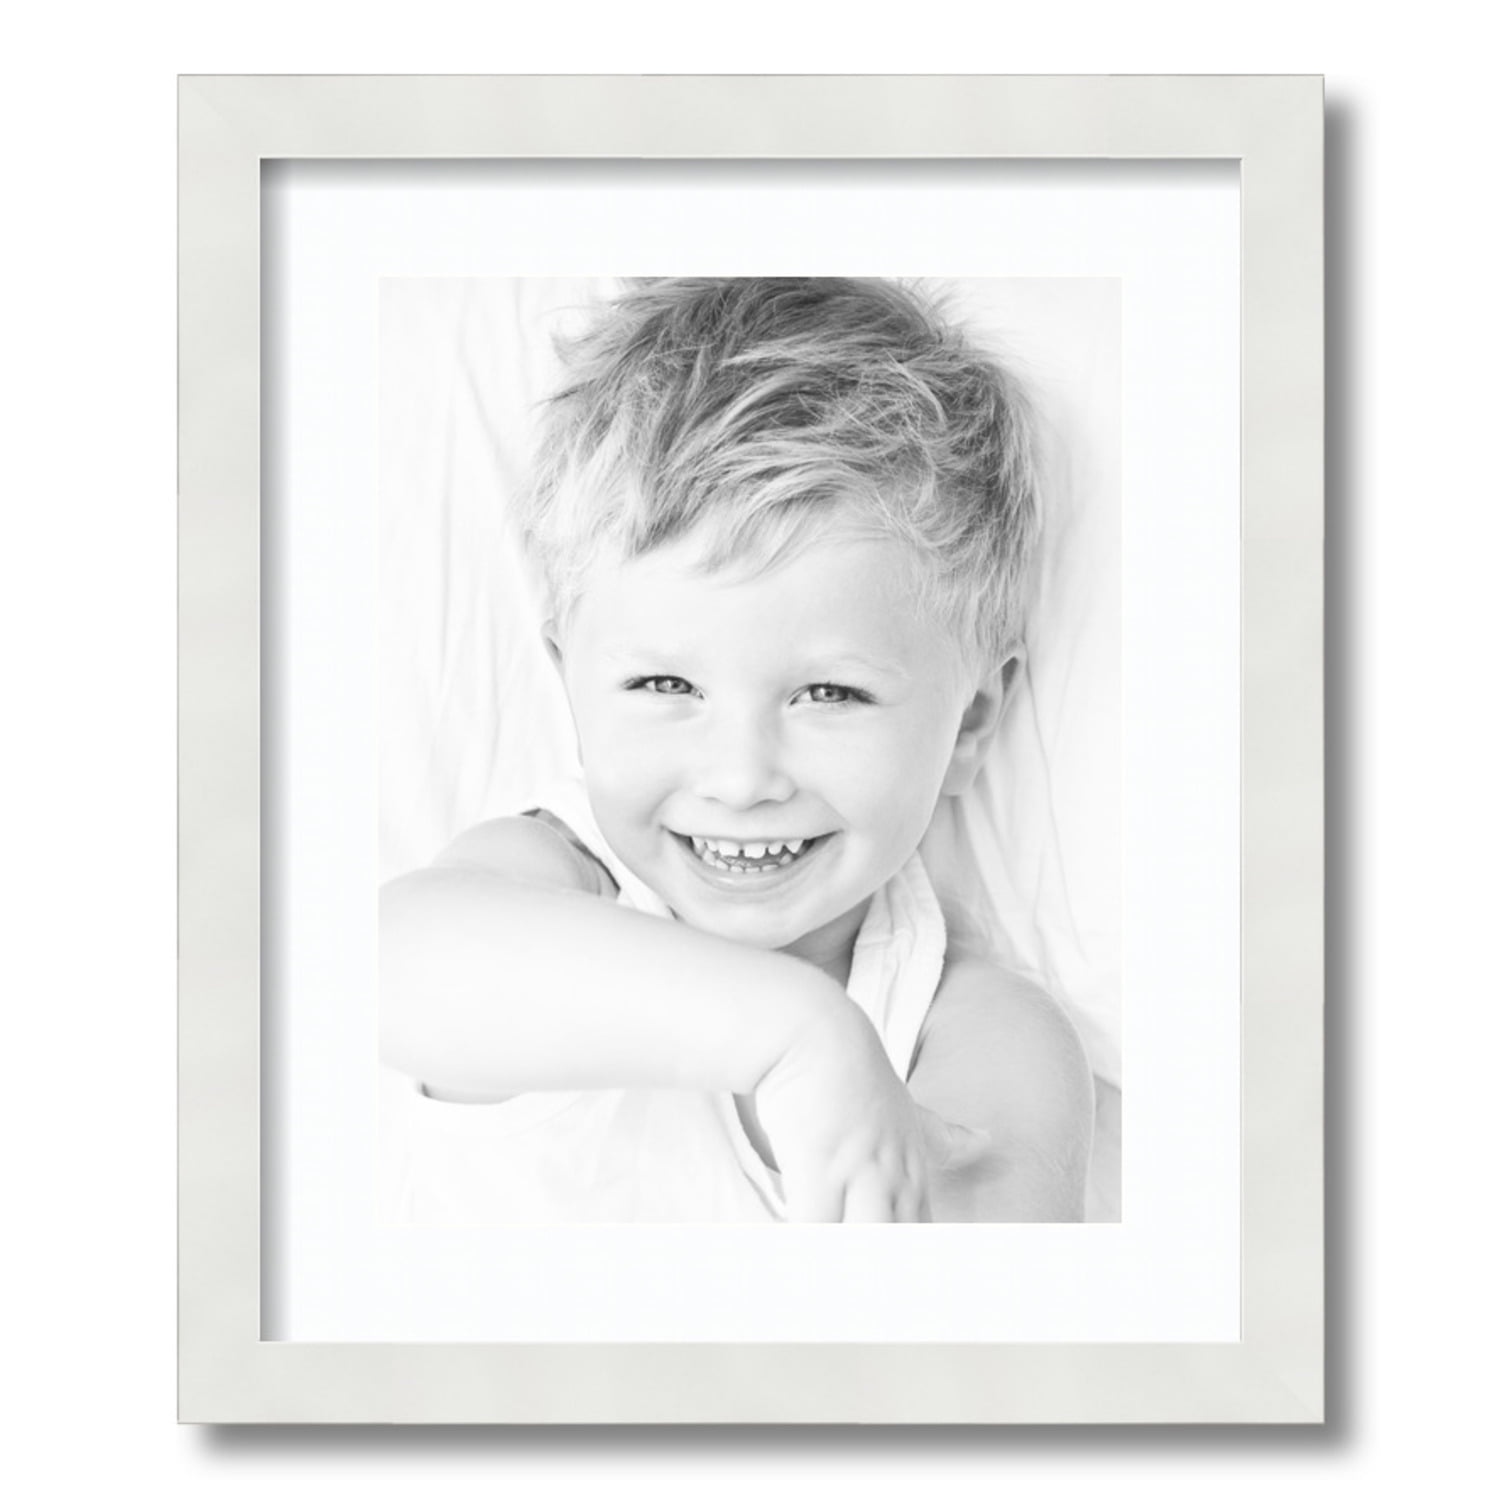 Framatic Fineline 11x14 White Frame with Single 8x10 Mat